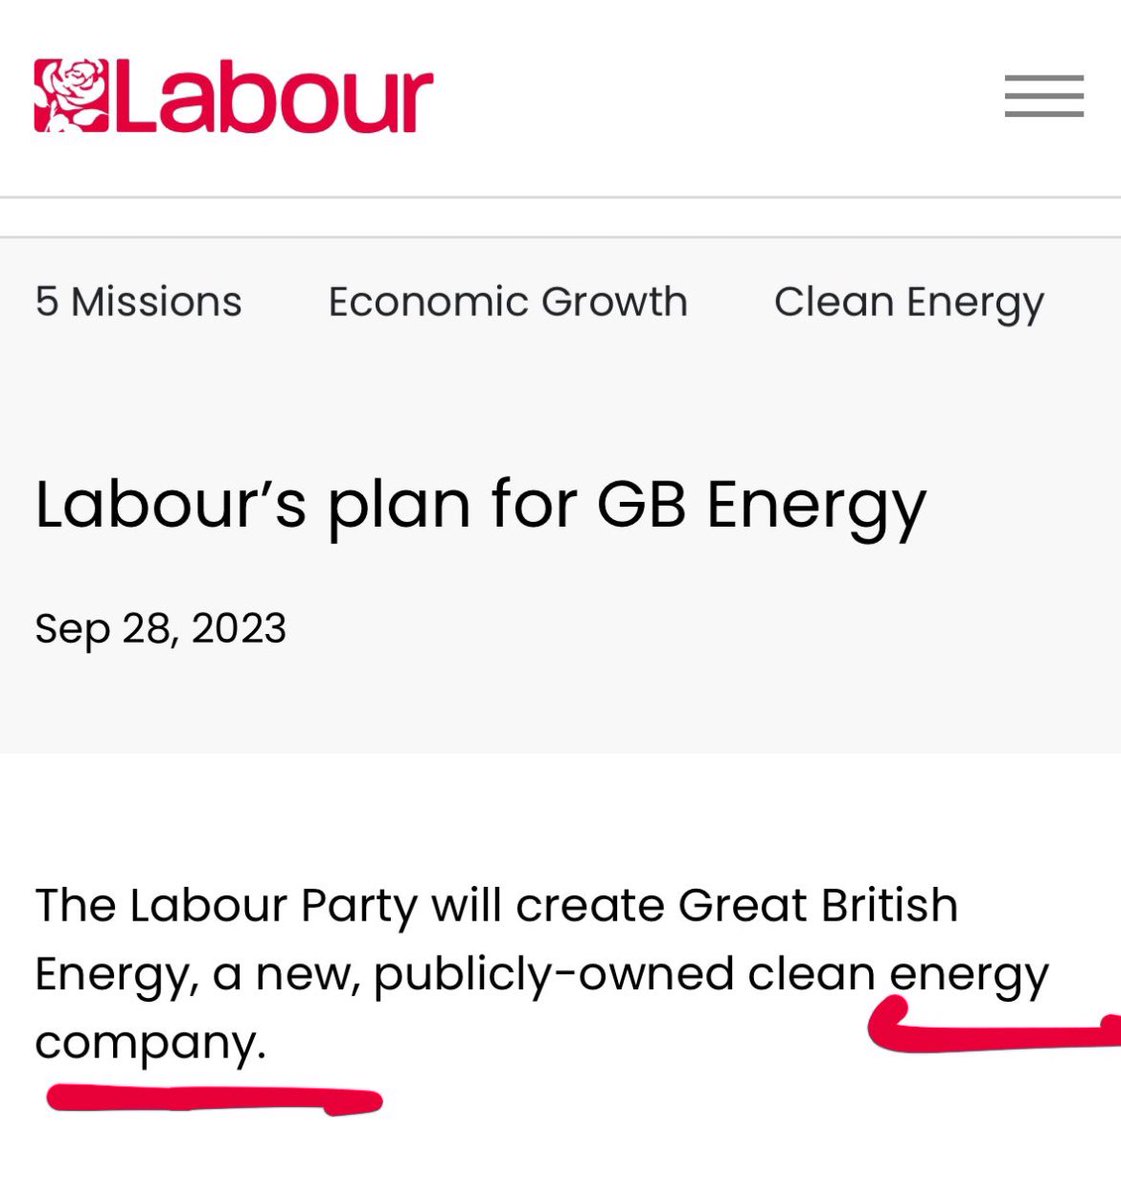 “Well no, it’d be an investment vehicle so, erm, not an energy company.” Only Labour could announce an energy company that isn’t *actually* an energy company. But he wants us to be grateful that it will be based in Scotland to tap our resources. How lucky we are.